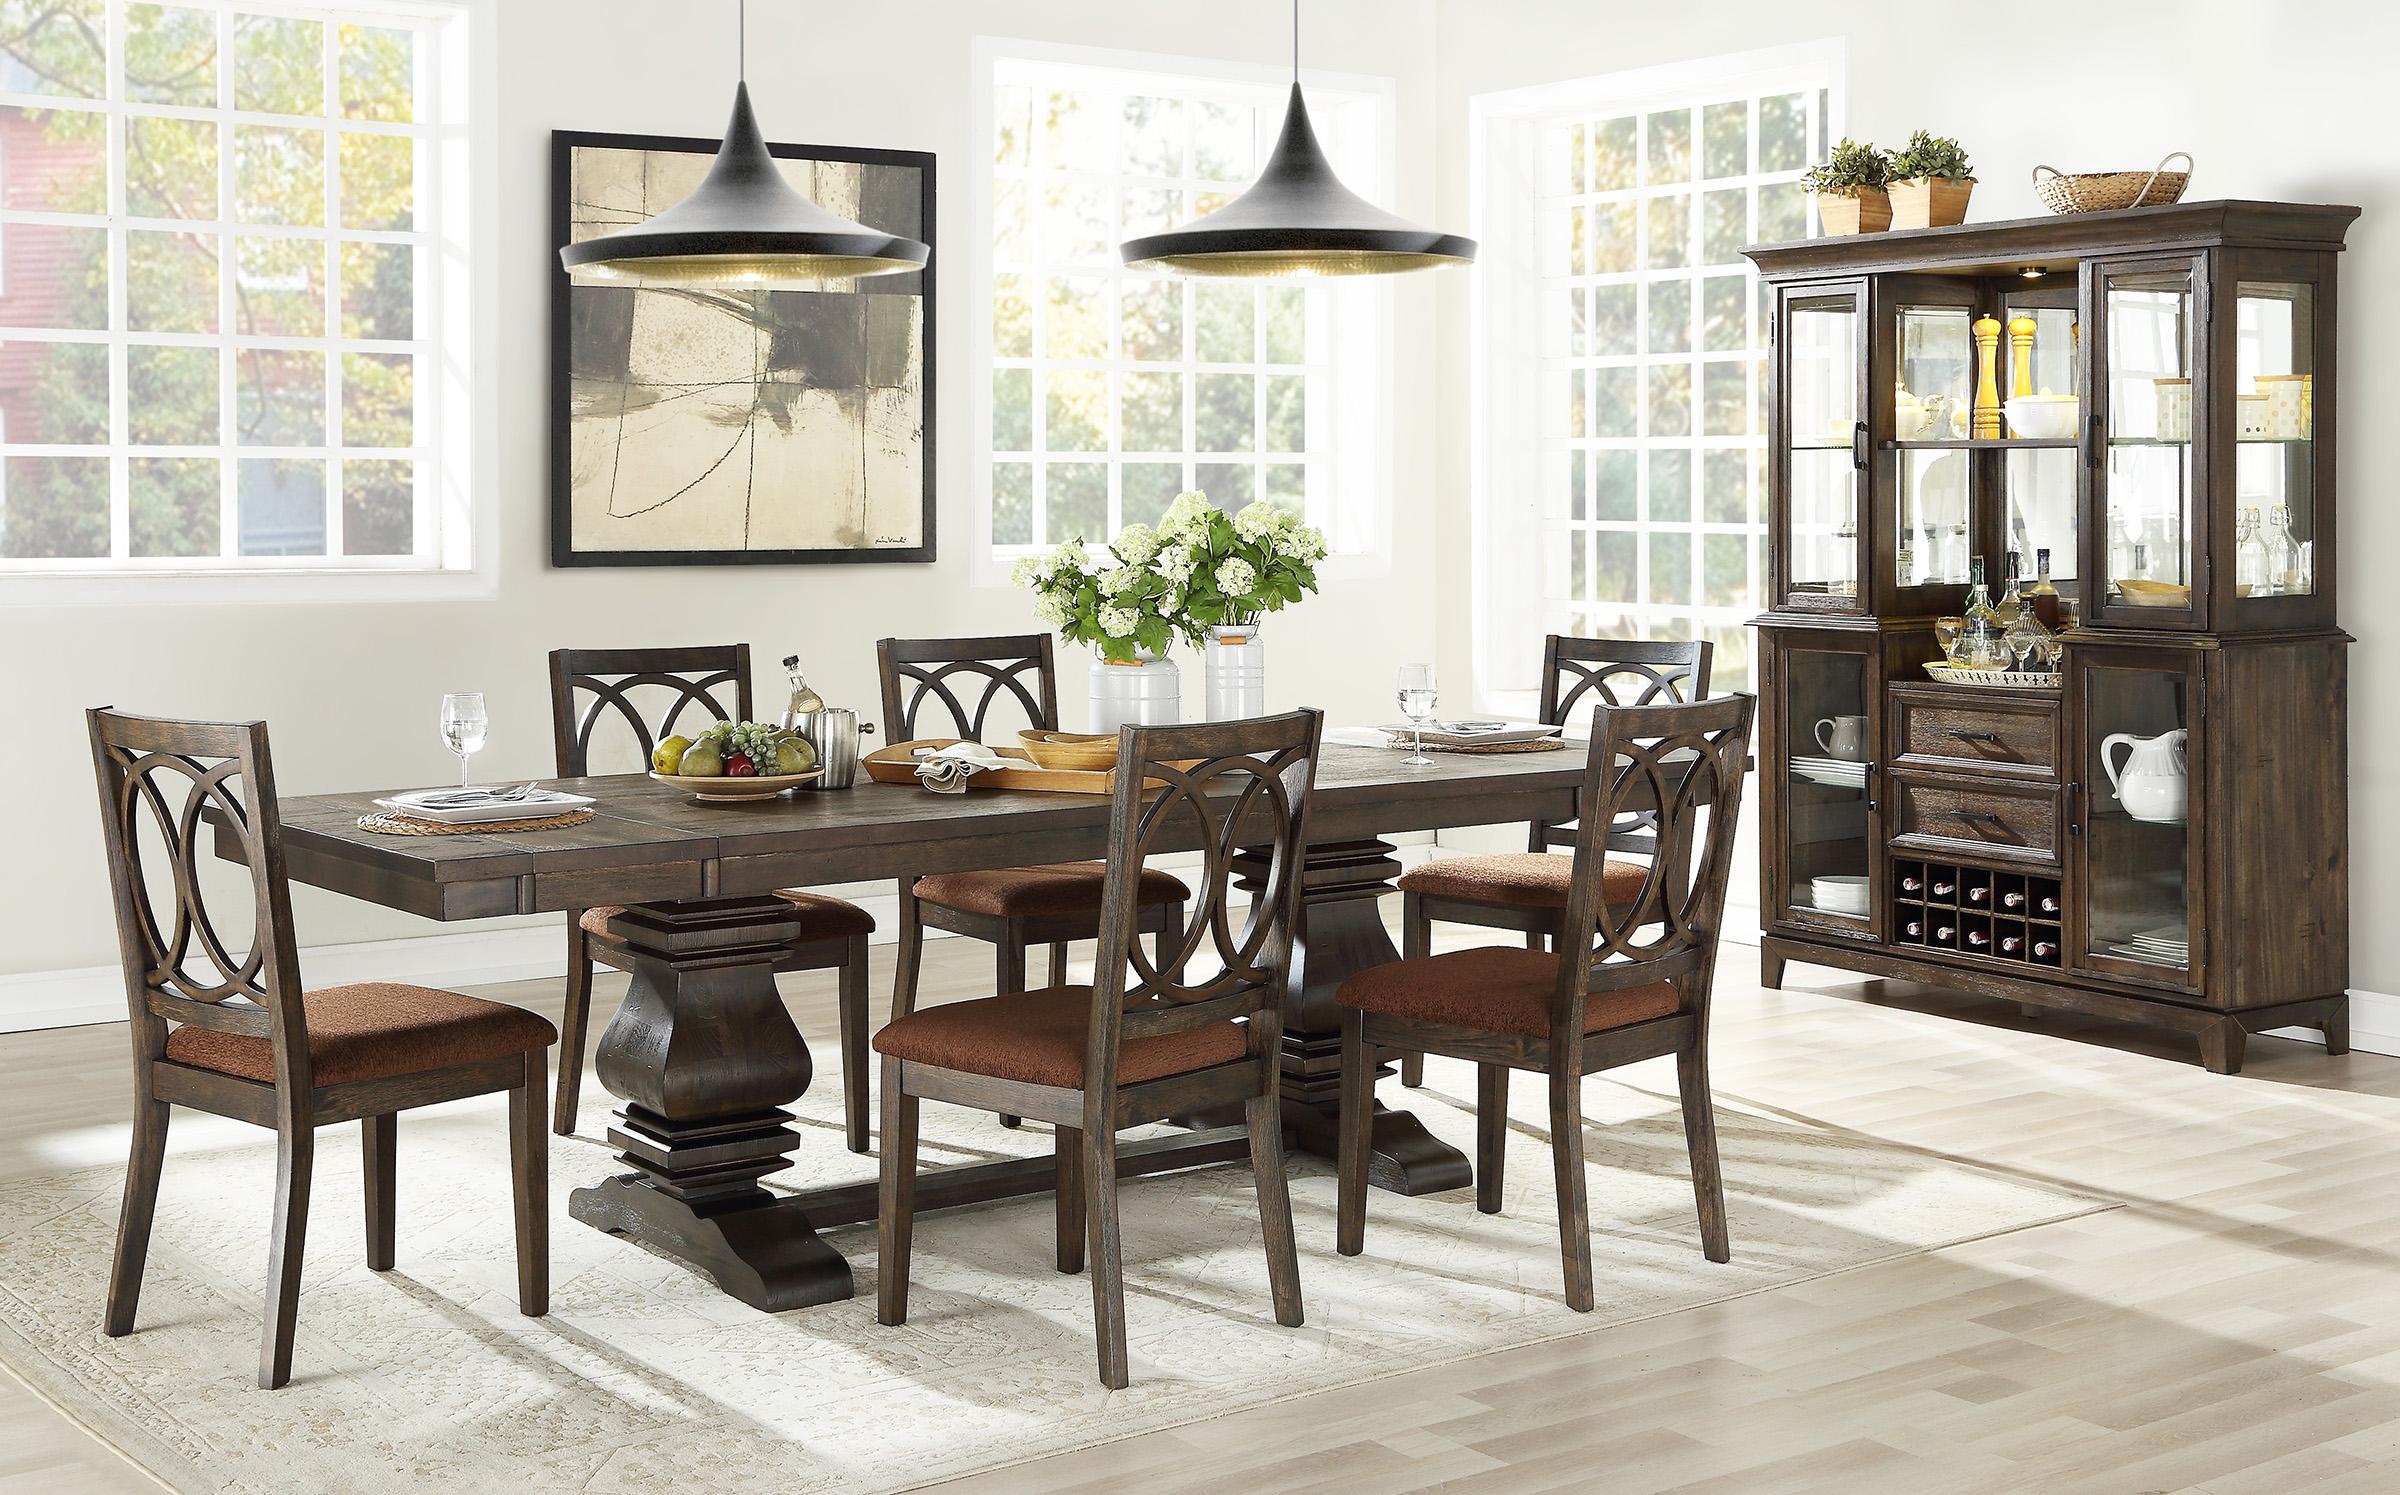 Classic, Traditional Dining Table Set Jameson 62320-Set-7 in Espresso, Brown Fabric